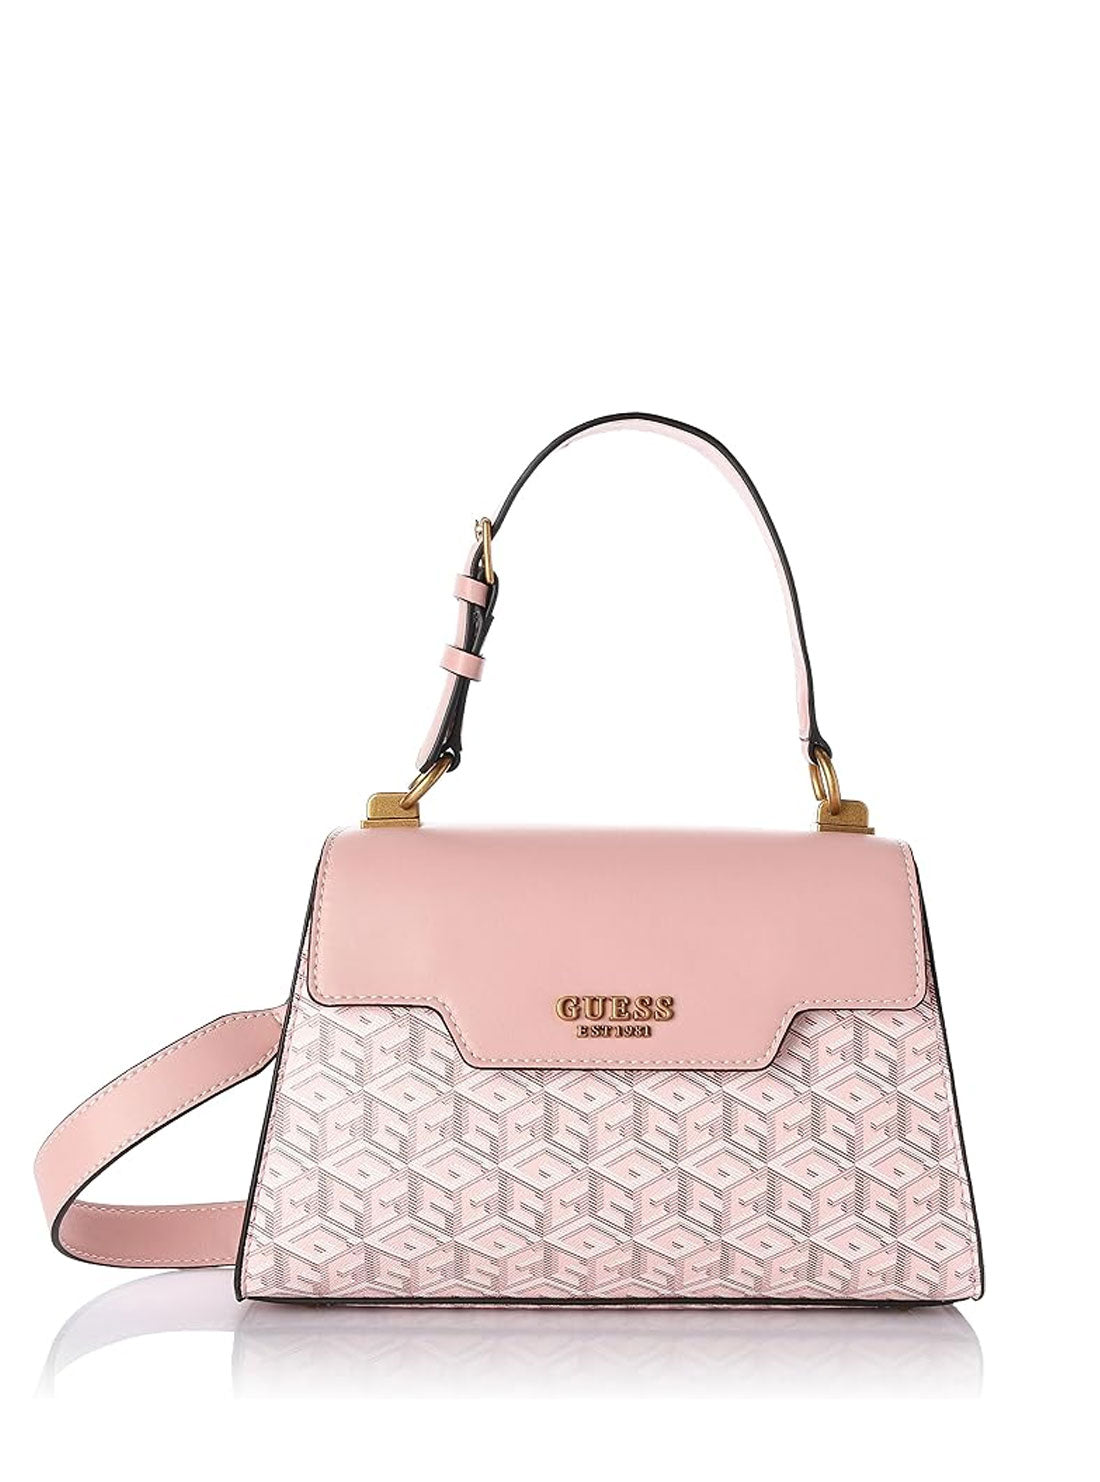 guess womens Pale Rose Logo Hallie Crossbody Bag front view